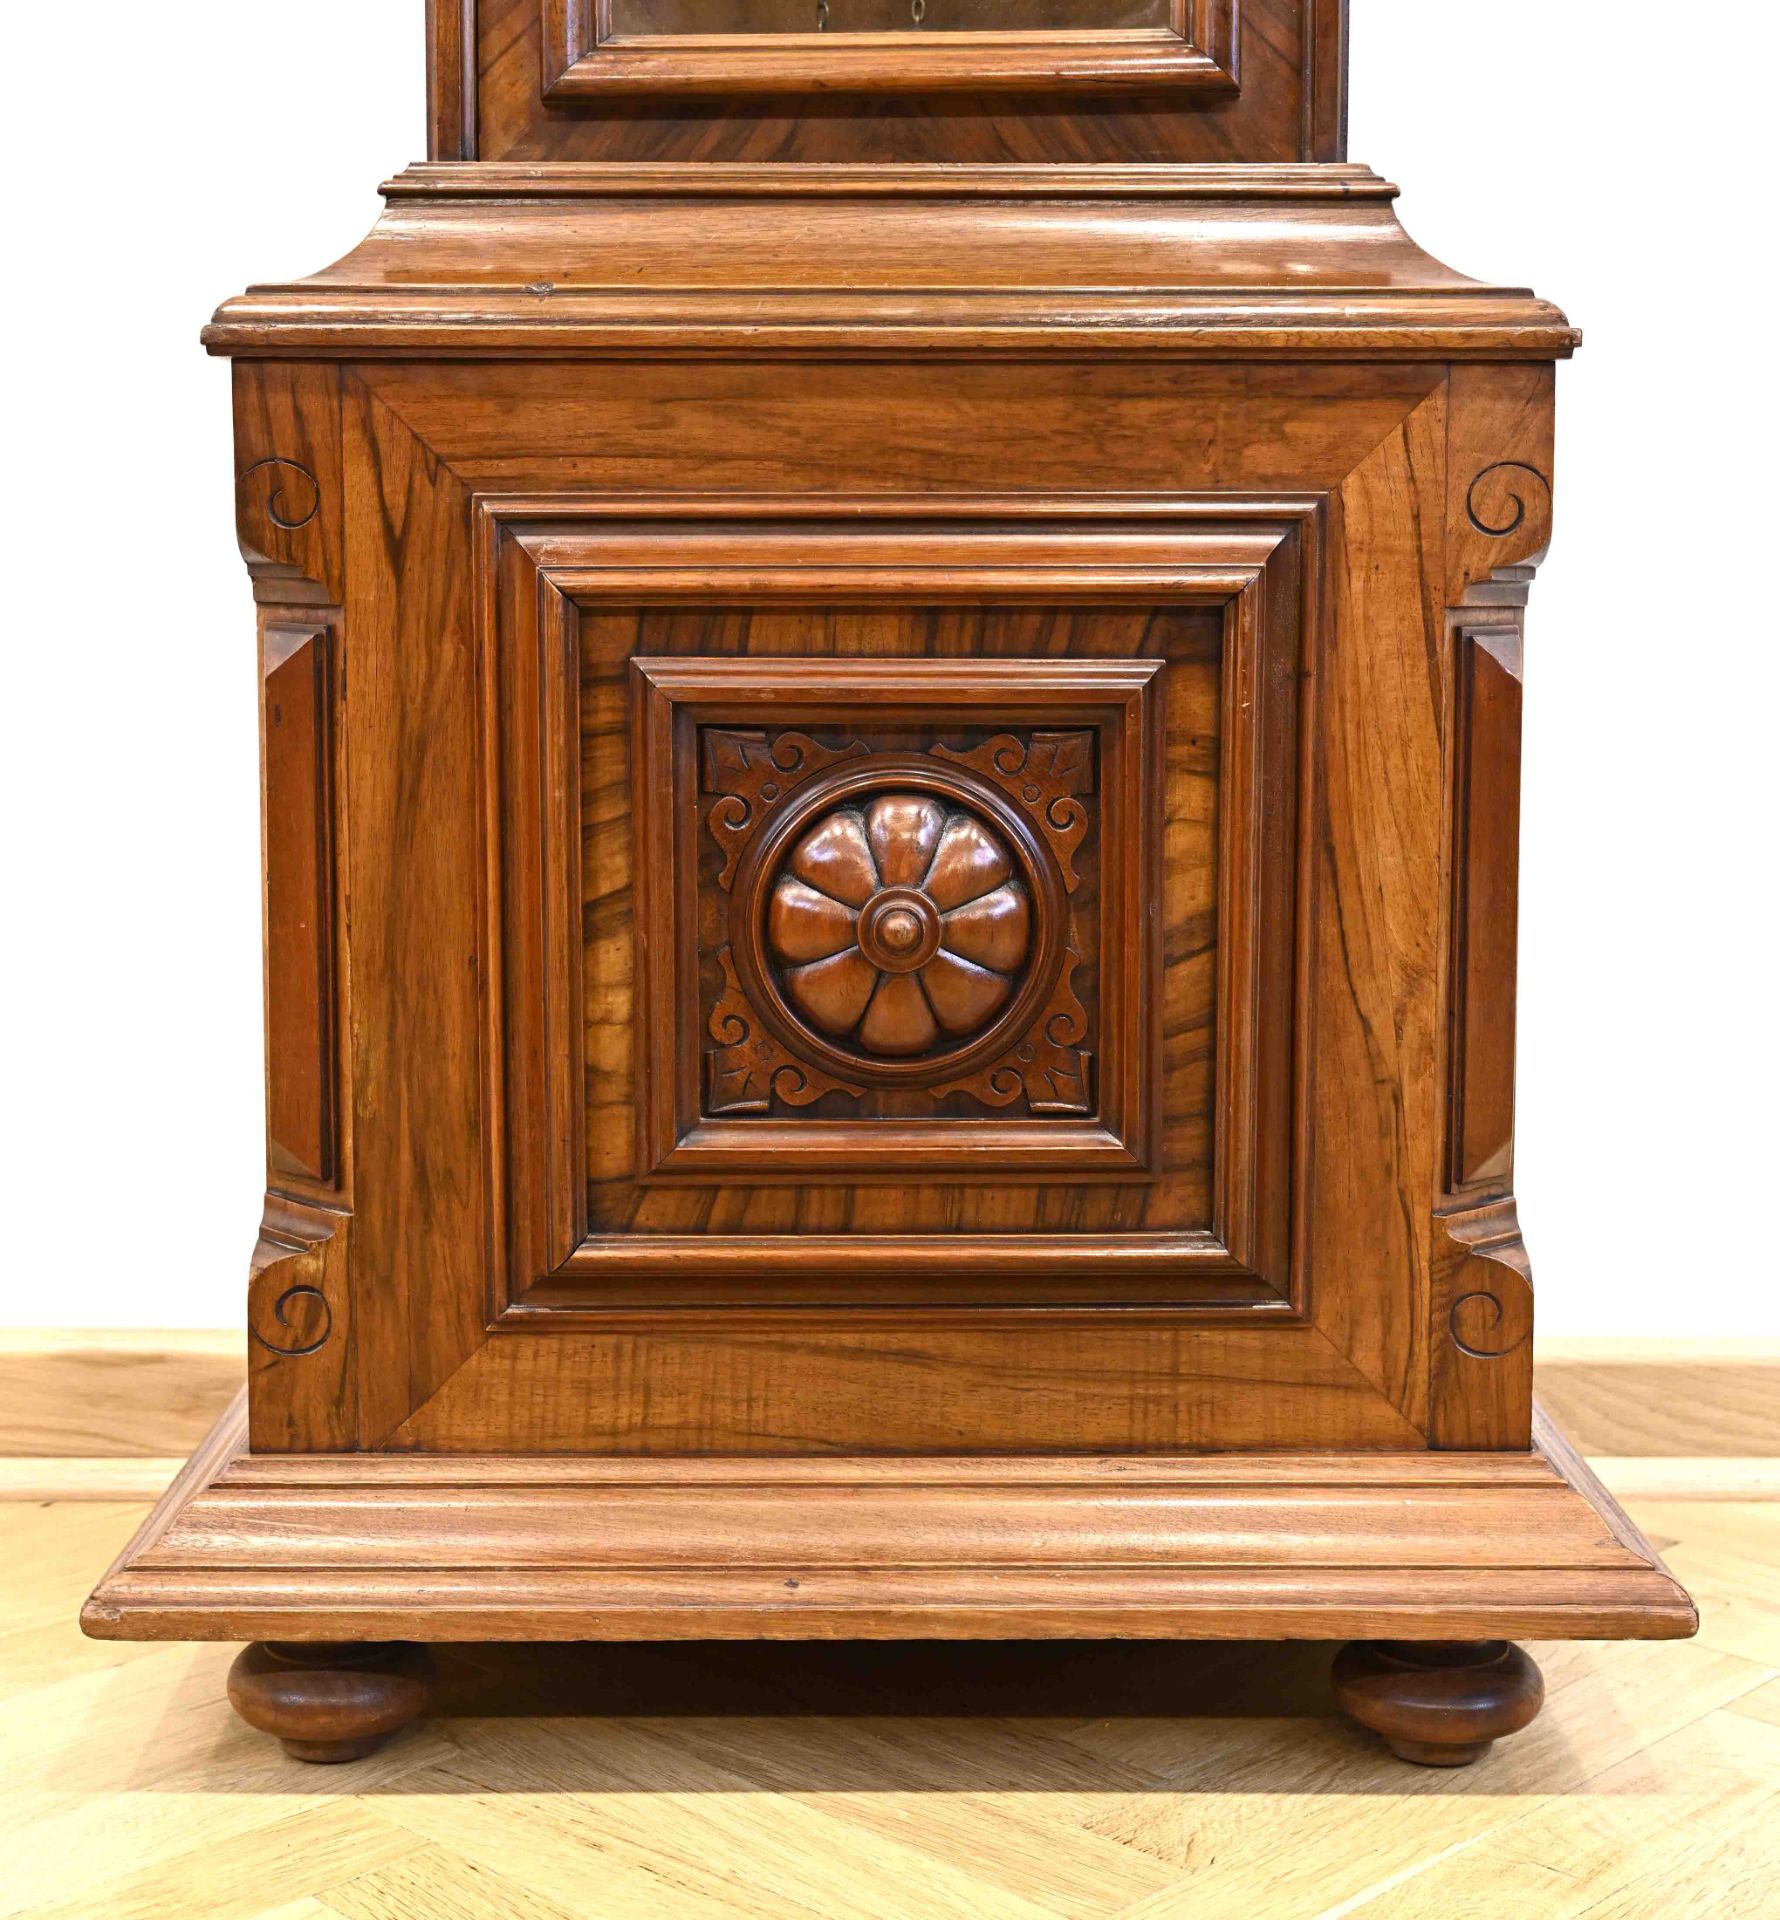 Impressive grandfather clock from the Wilhelminian period, around 1900 in Berlin, solid walnut with - Image 5 of 7